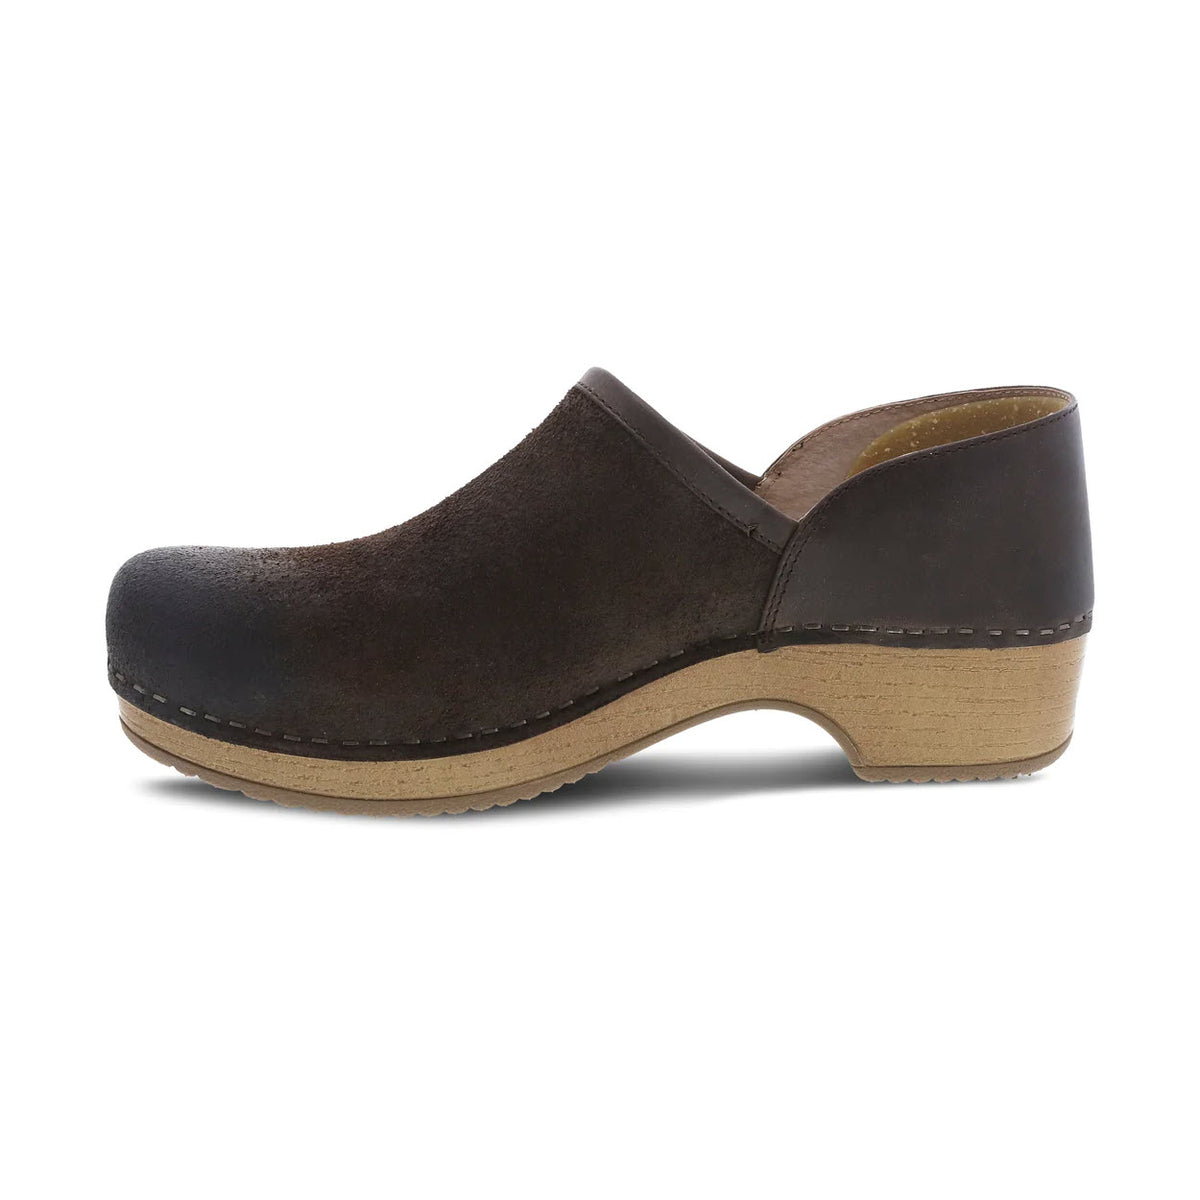 Brown and black Dansko Brenna Chocolate Burnished clog with a wooden sole and low heel, side view, isolated on a white background.